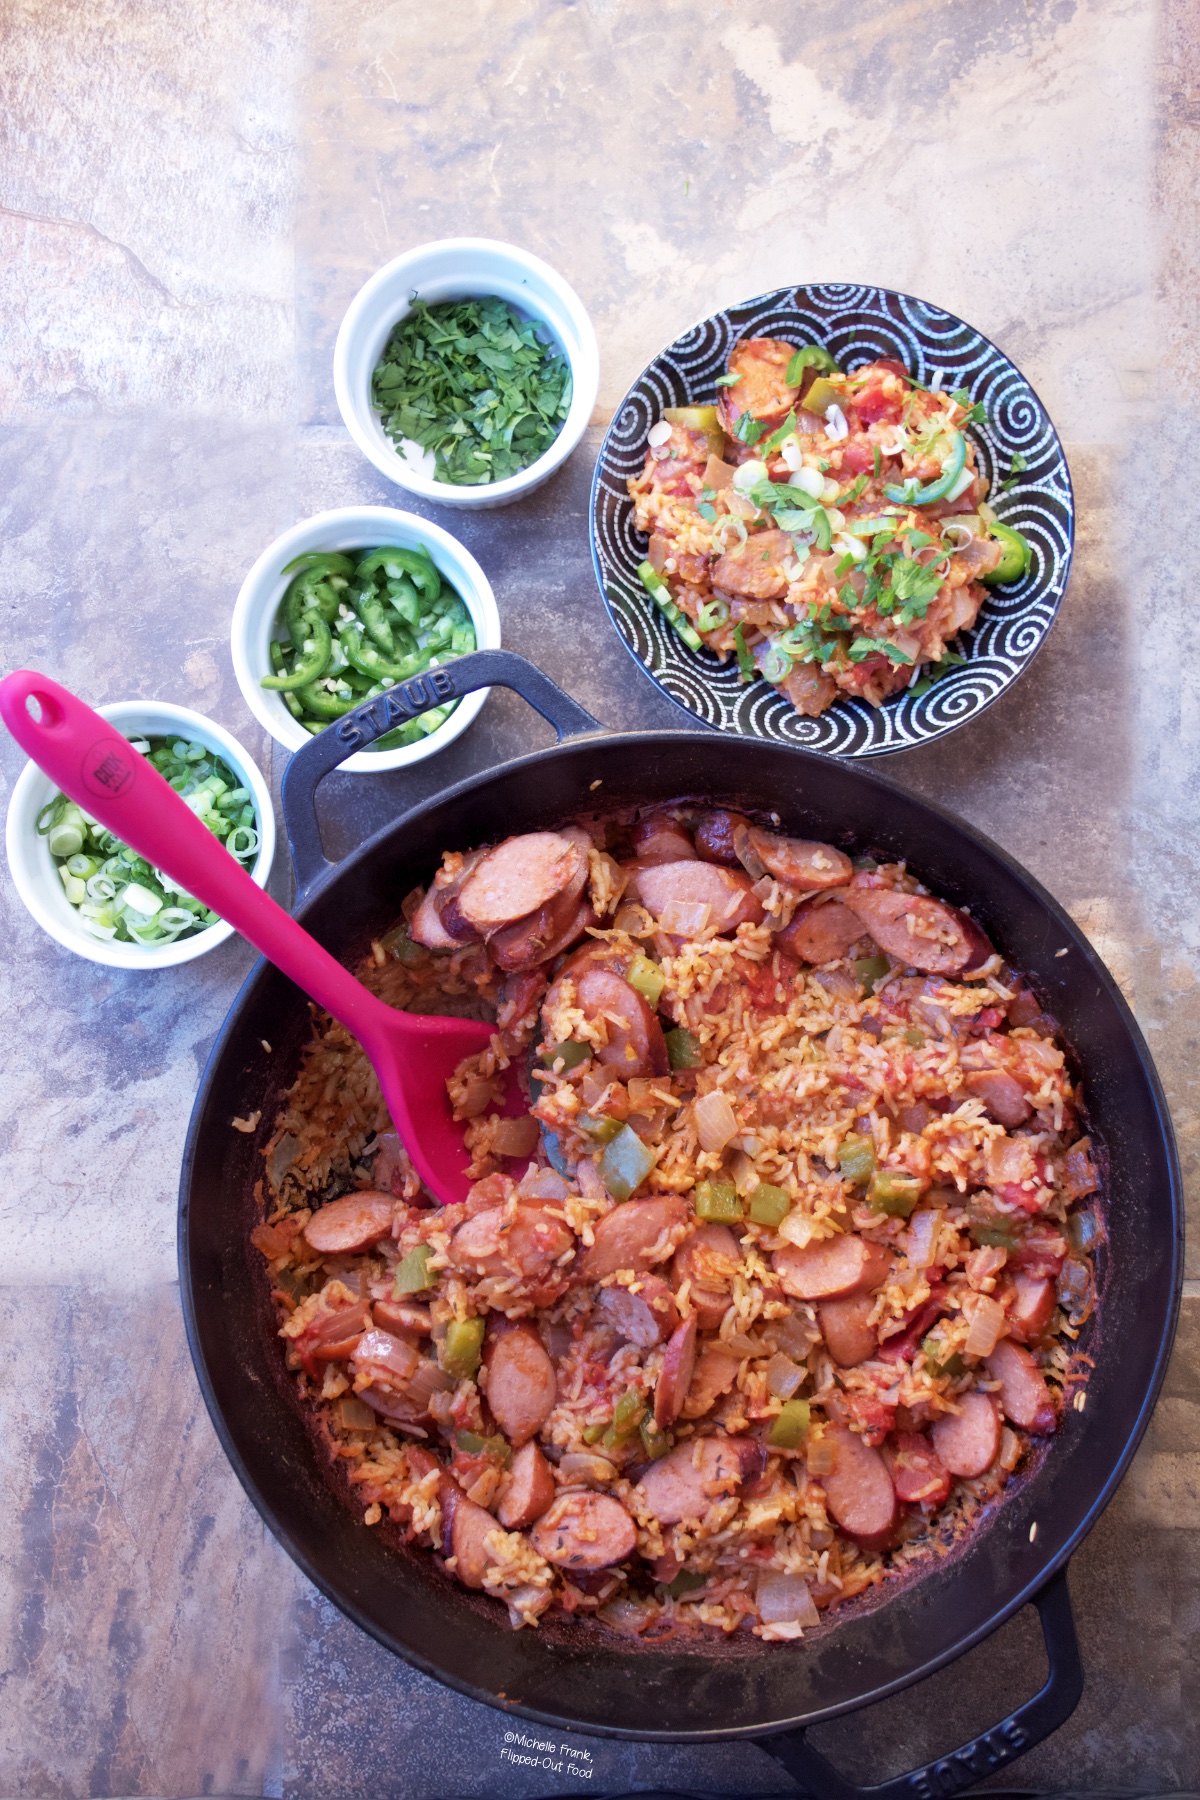 Cajun Sausage-Rice Skillet:  A bowl with a serving of the sausage and rice, with ramekins of scallions, jalapenos, and parsley sitting behind the skillet.